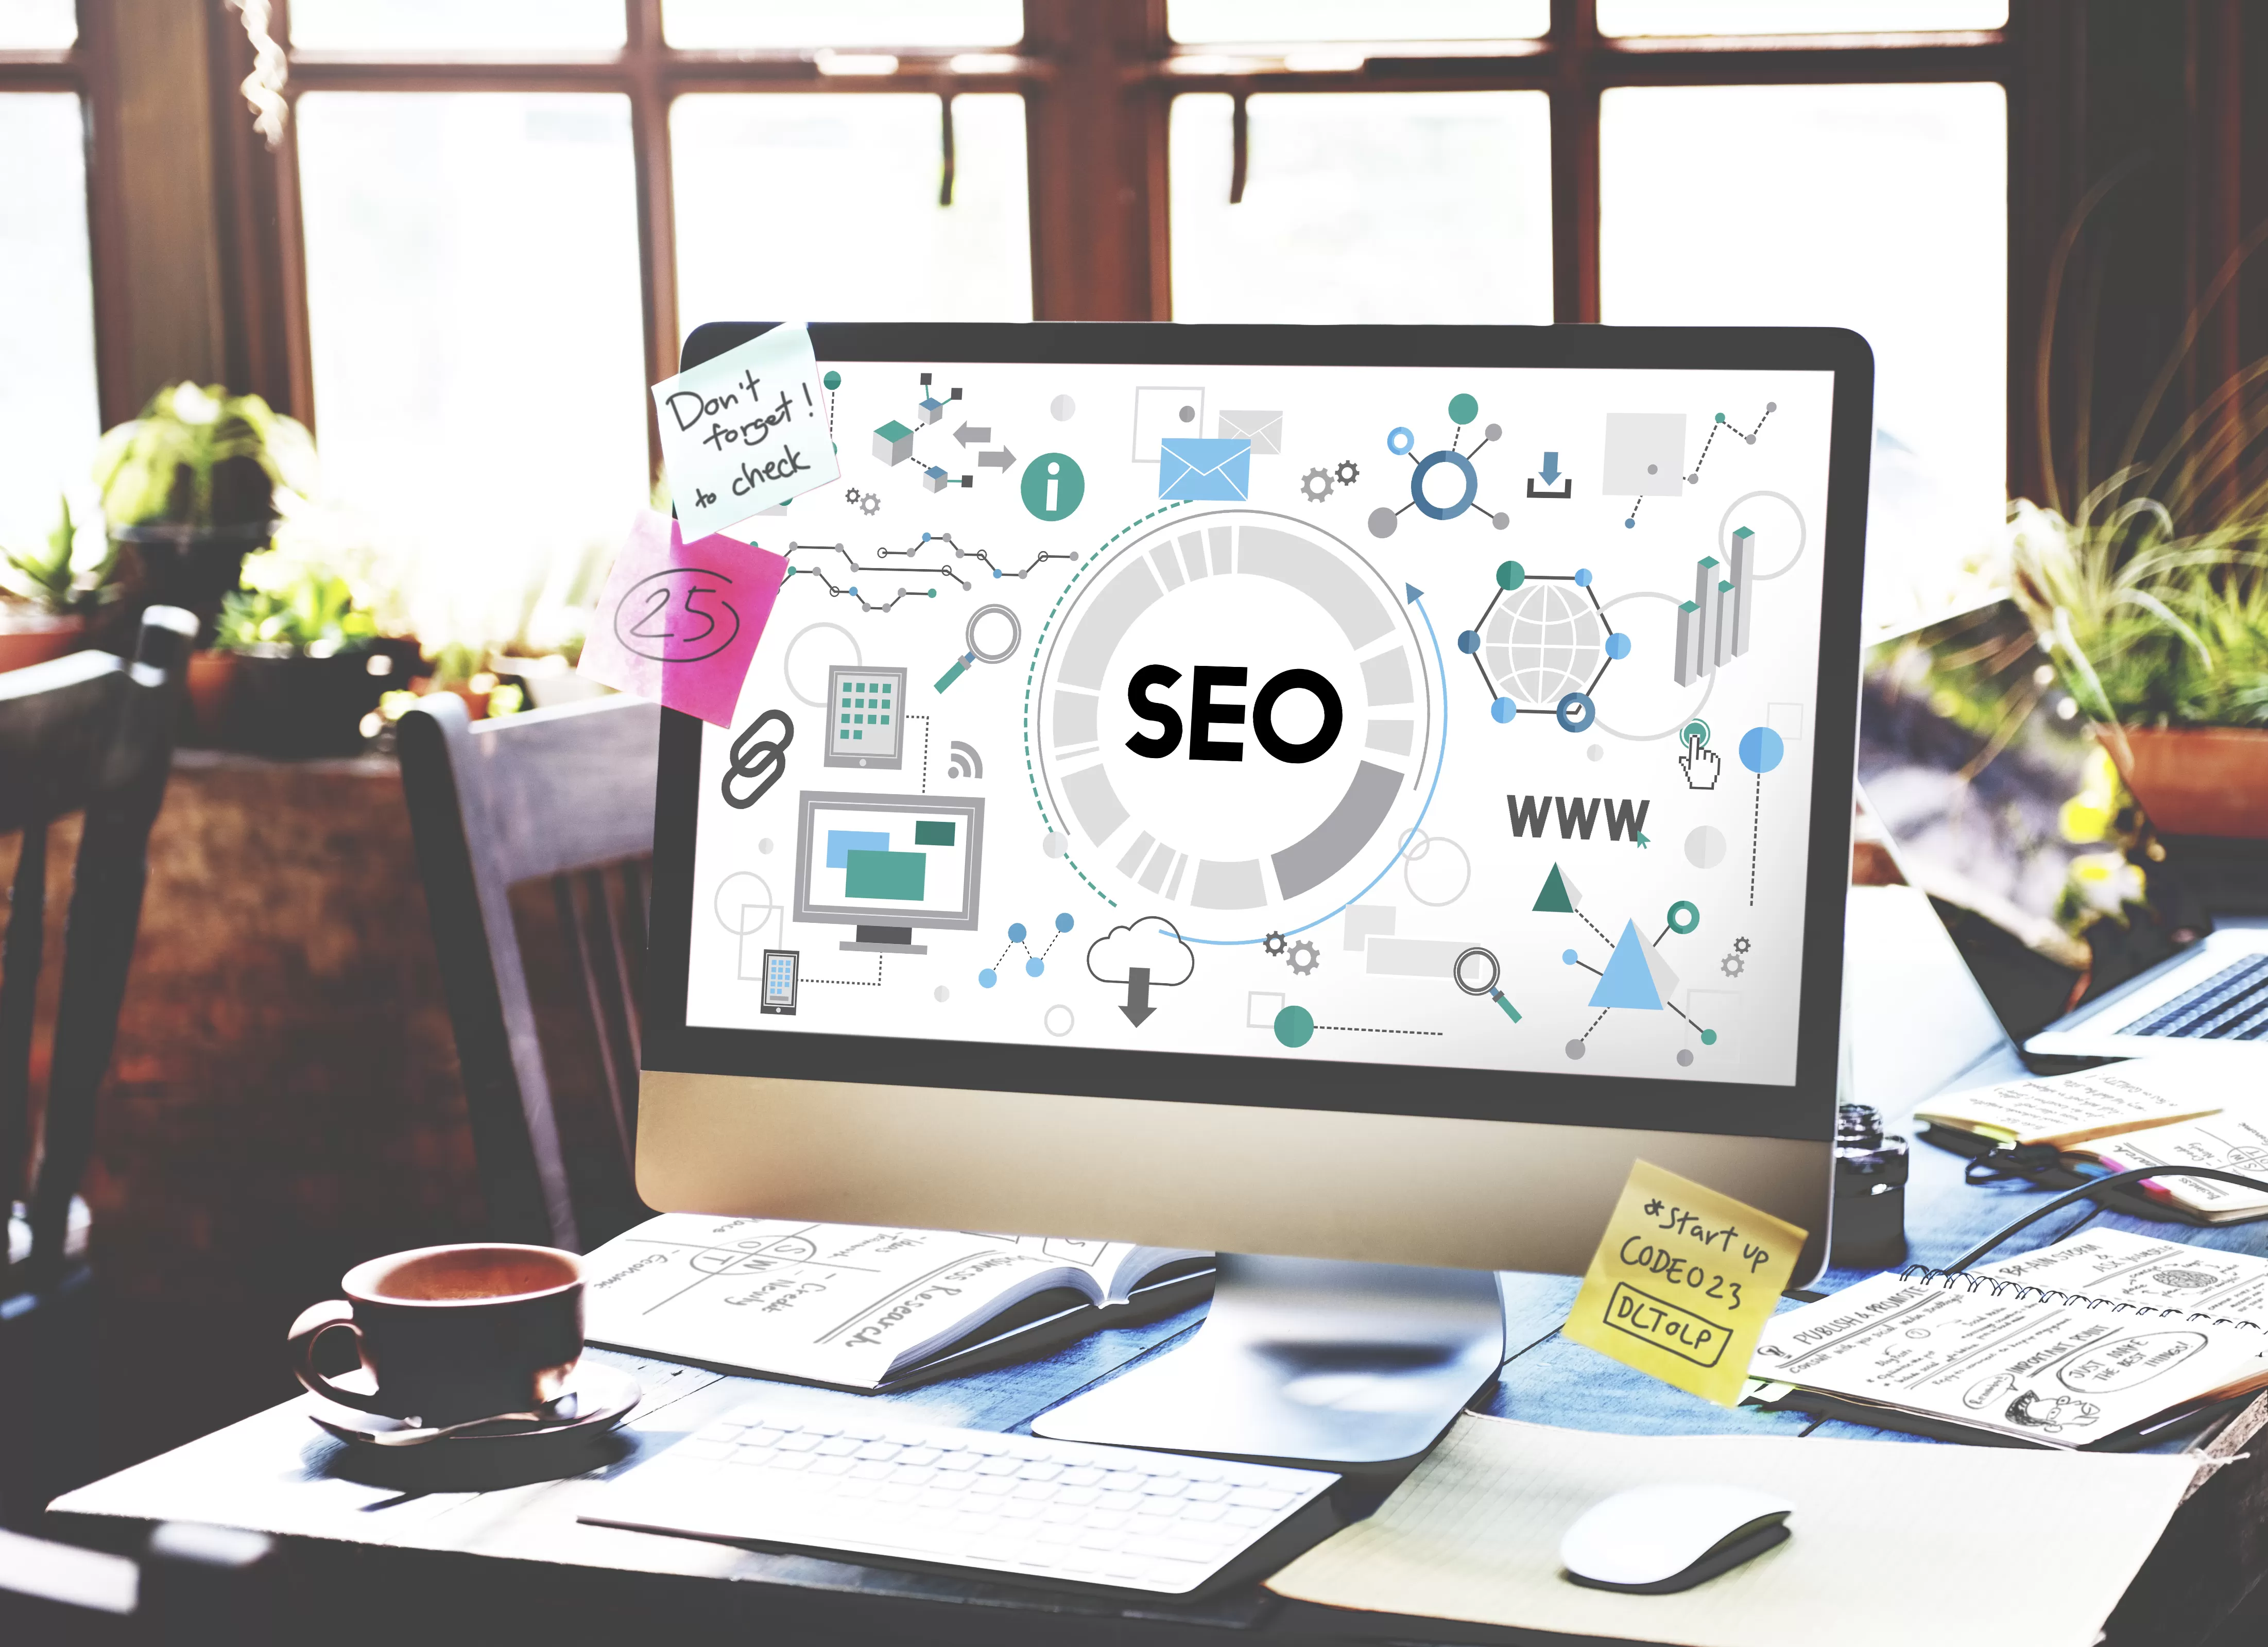 Can PPC Advertising Help SEO Efforts In Houston